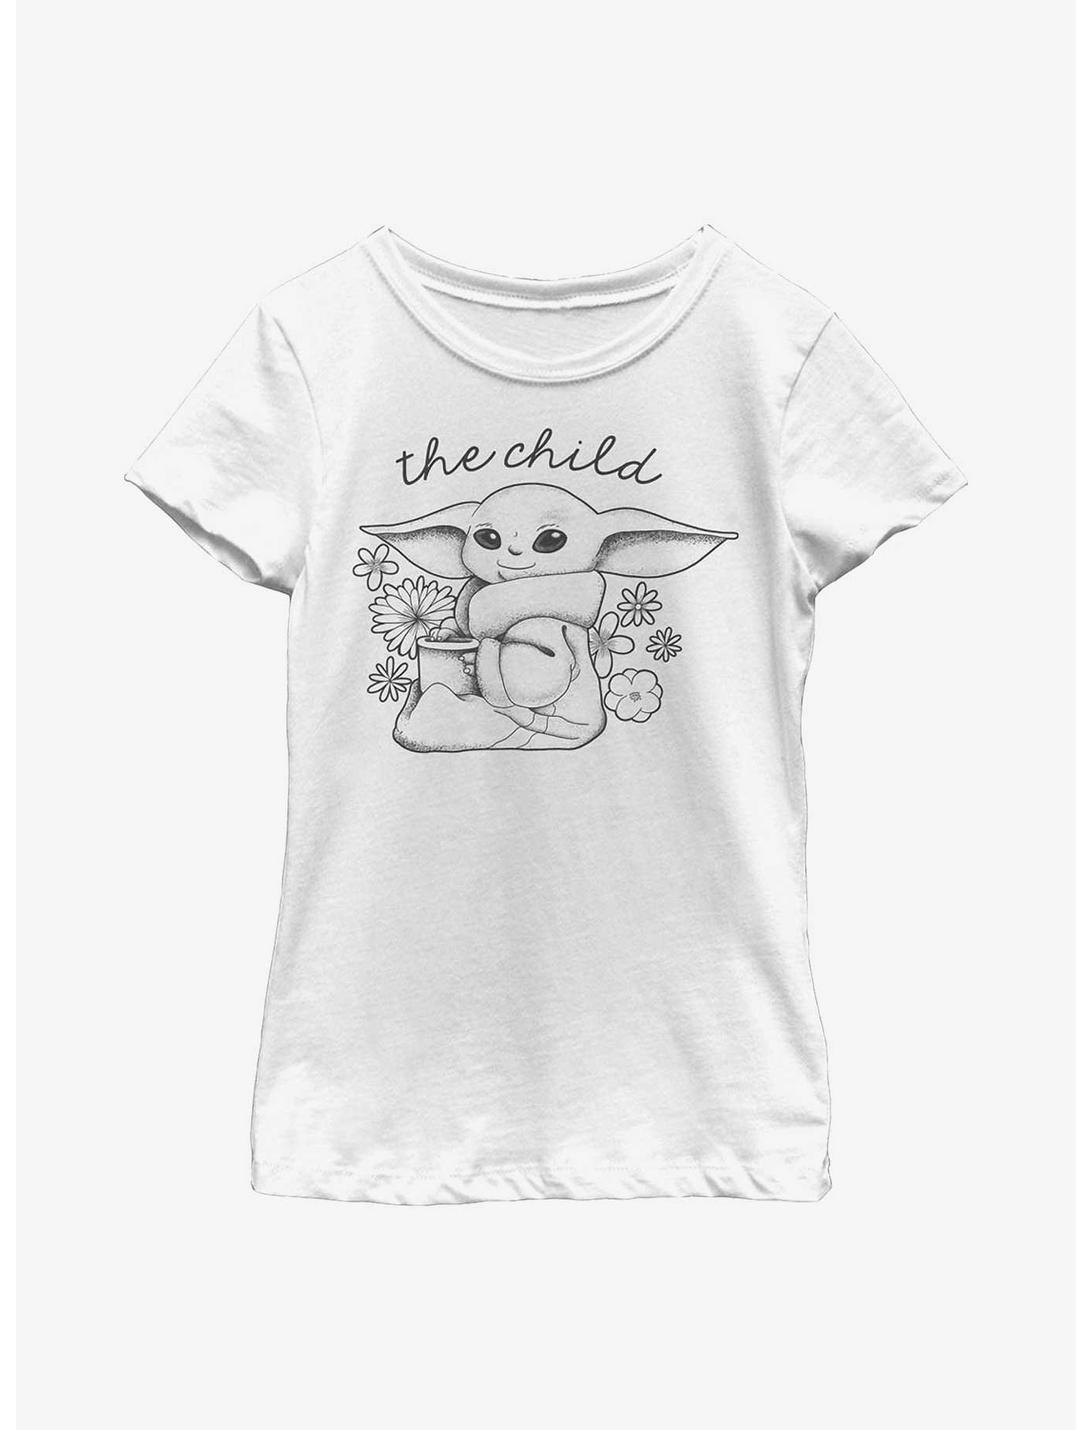 Star Wars The Mandalorian The Child Spring Flowers Youth Girls T-Shirt, WHITE, hi-res